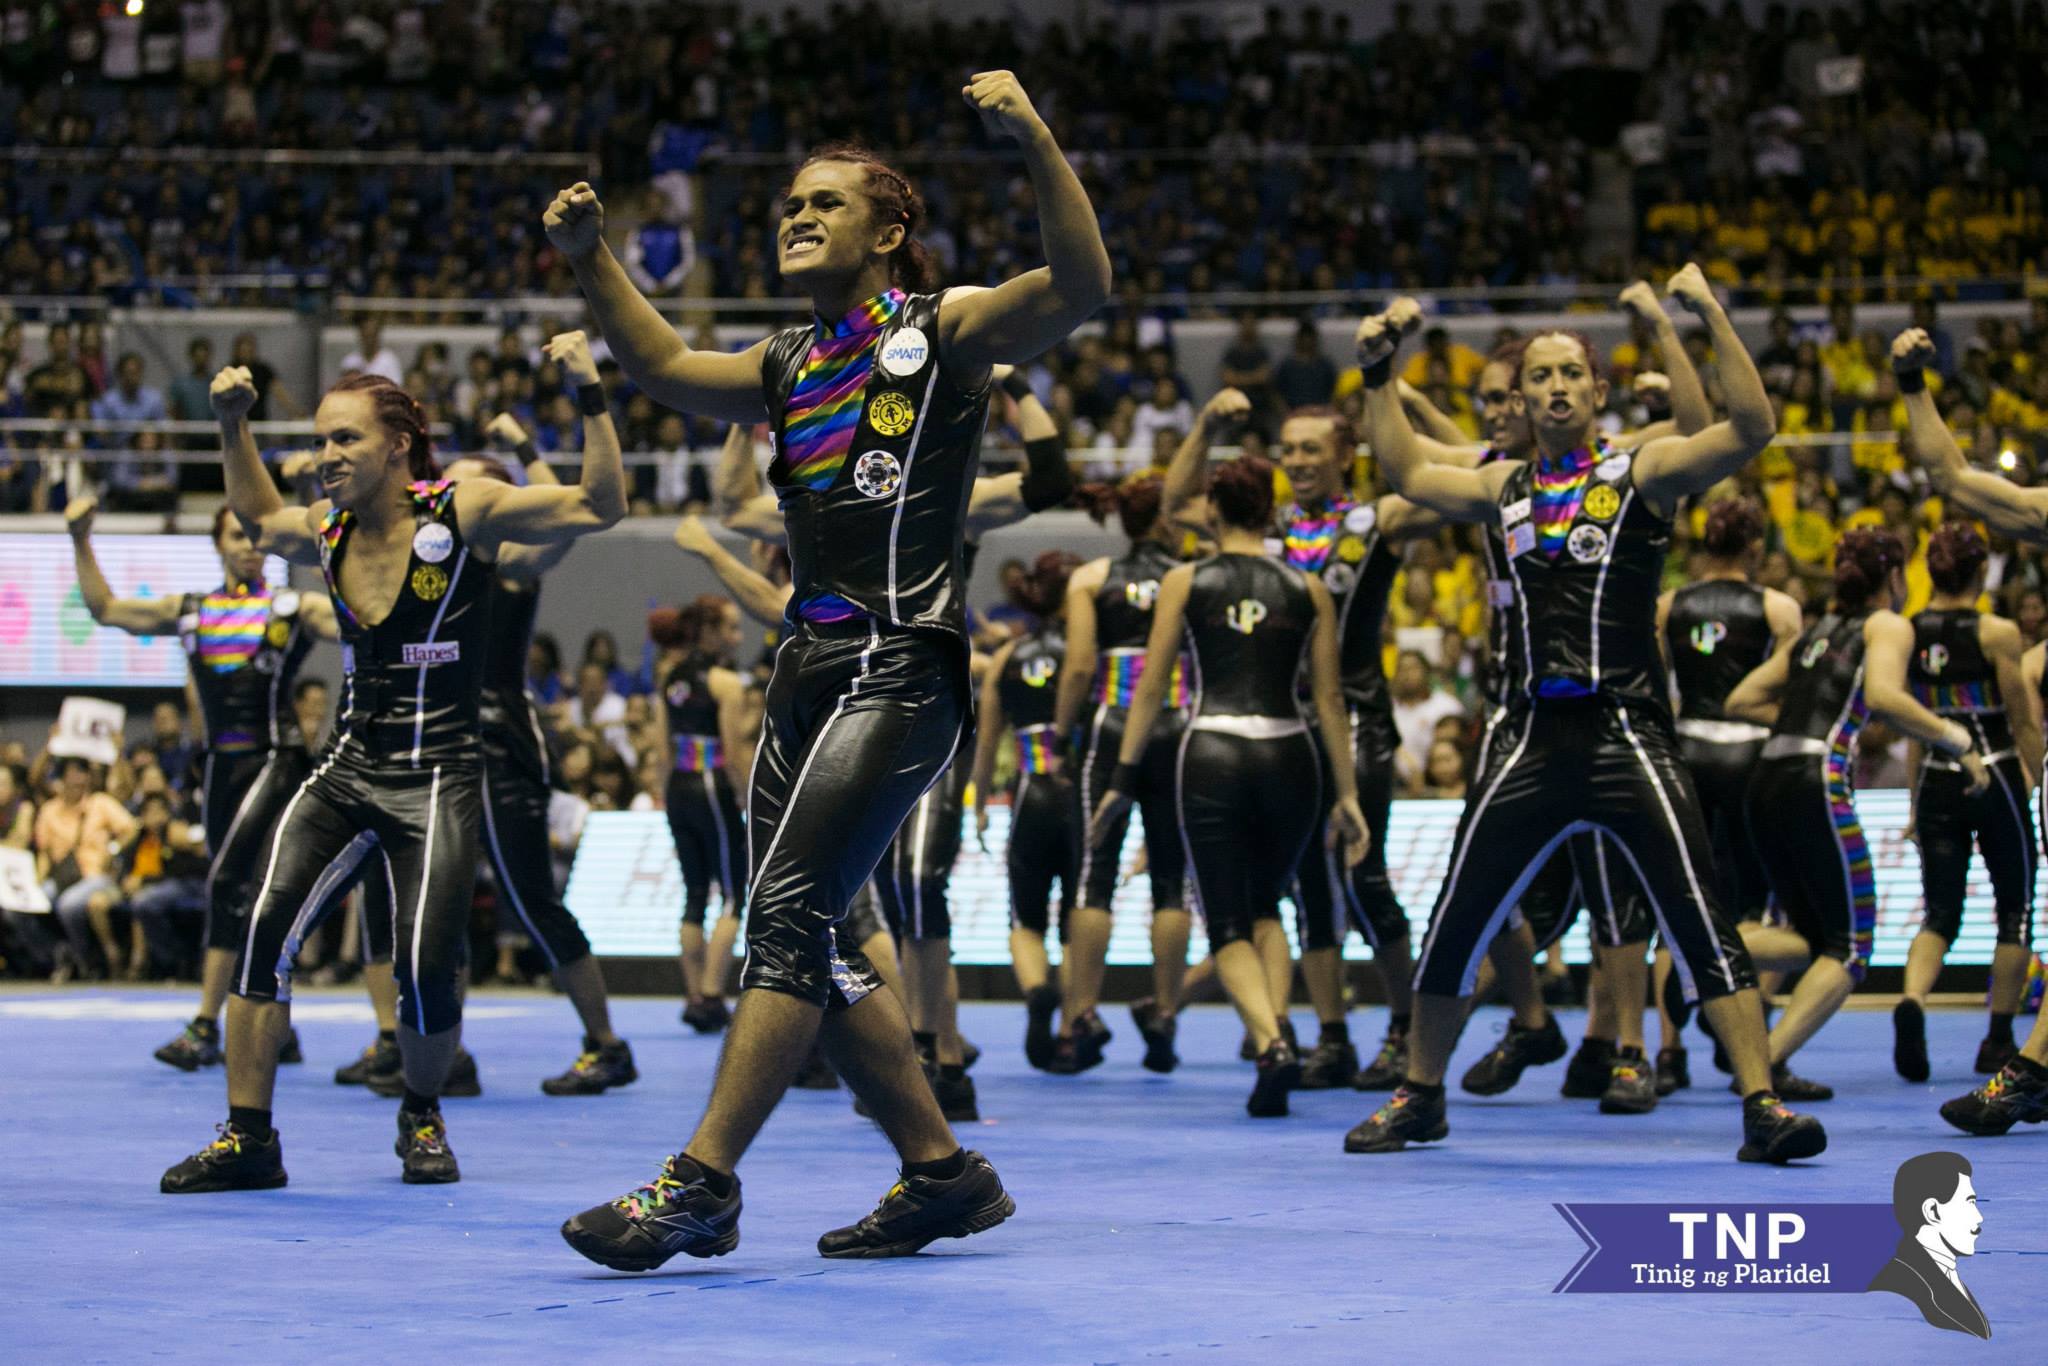 UP Pep Squad 2014 Equality LGBT Cheerdance Competition UAAP Season 77 78 File Photo by Patricia Nabong